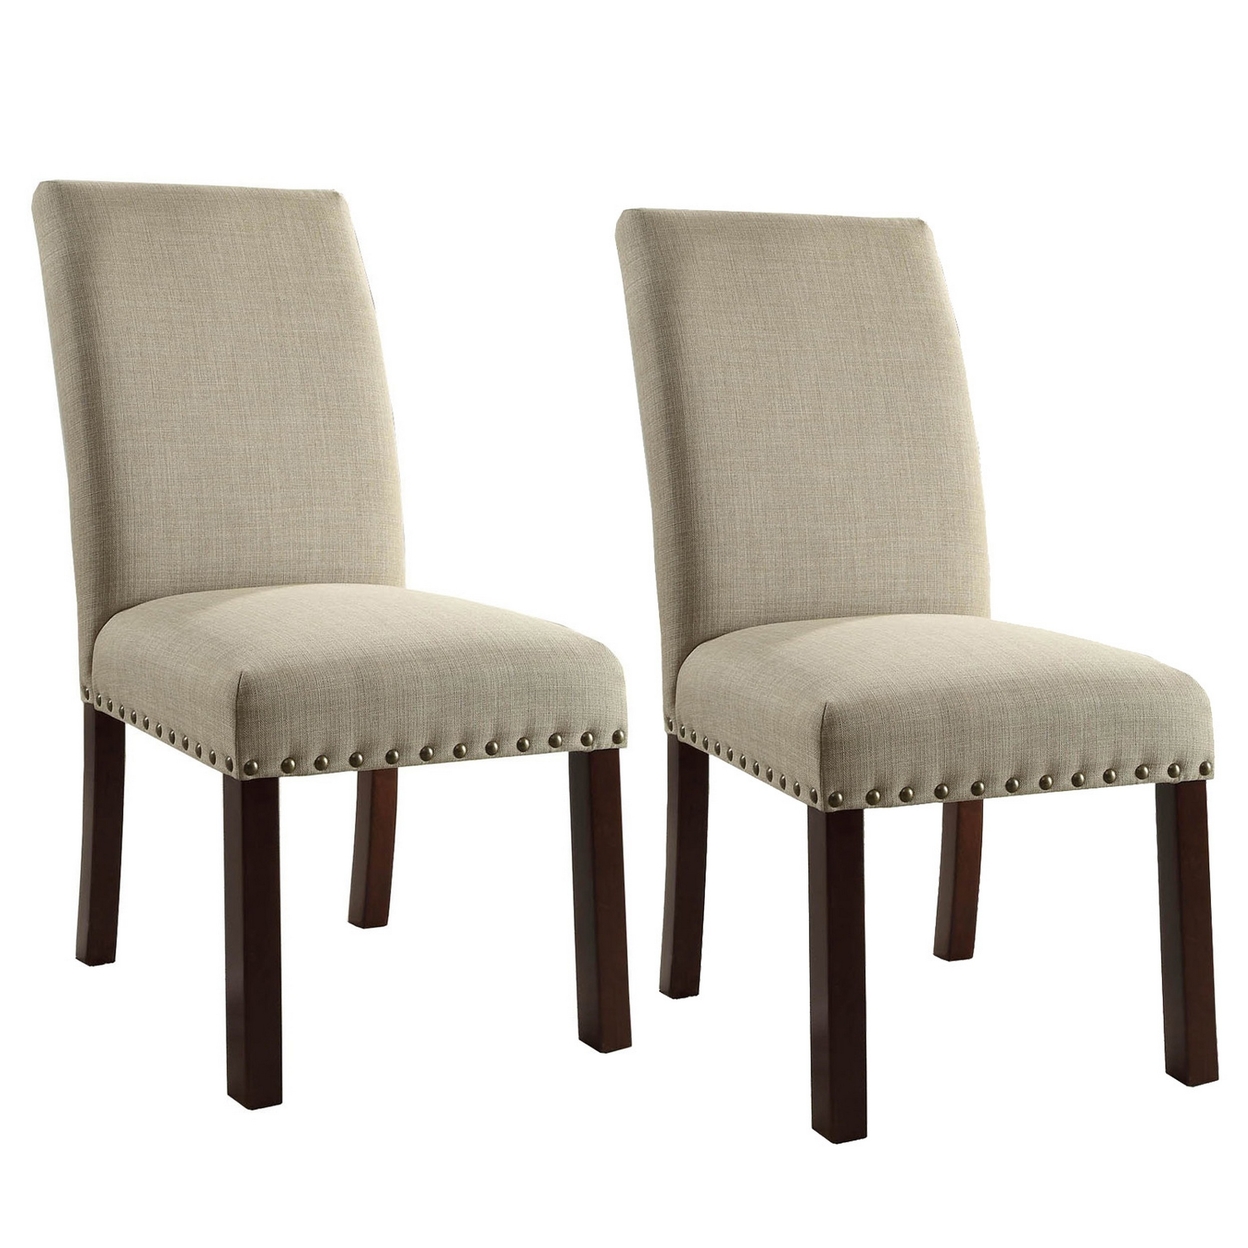 Fabric Upholstered Dining Chair With Nail Head Trim Accent And Wood Legs, Brown, Set Of Two- Saltoro Sherpi